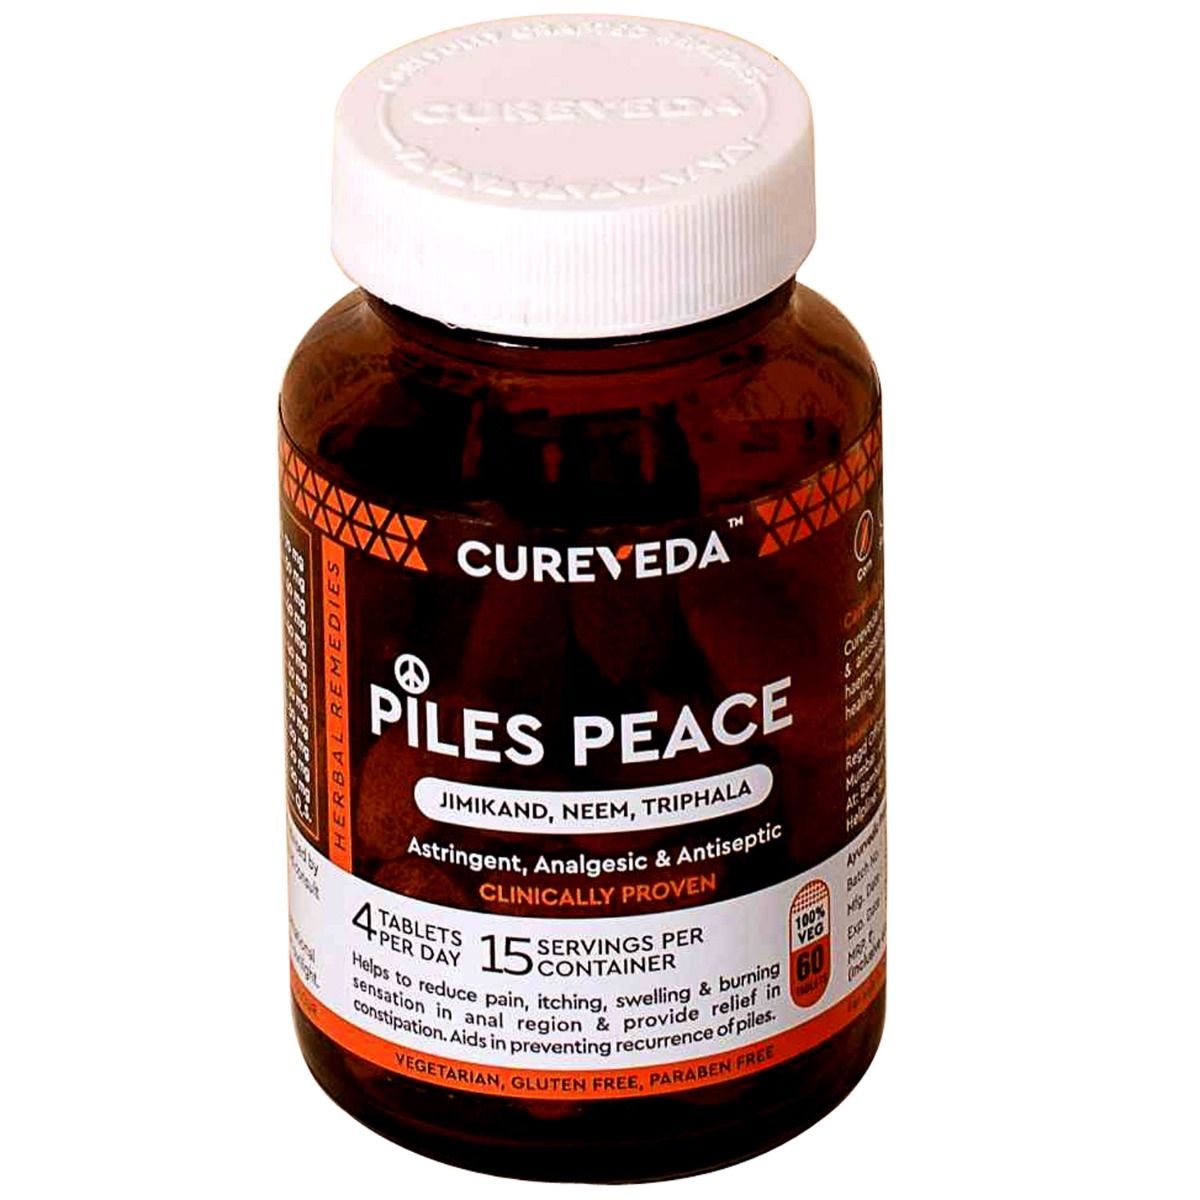 Cureveda Piles Peace, 60 Tablets, Pack of 1 